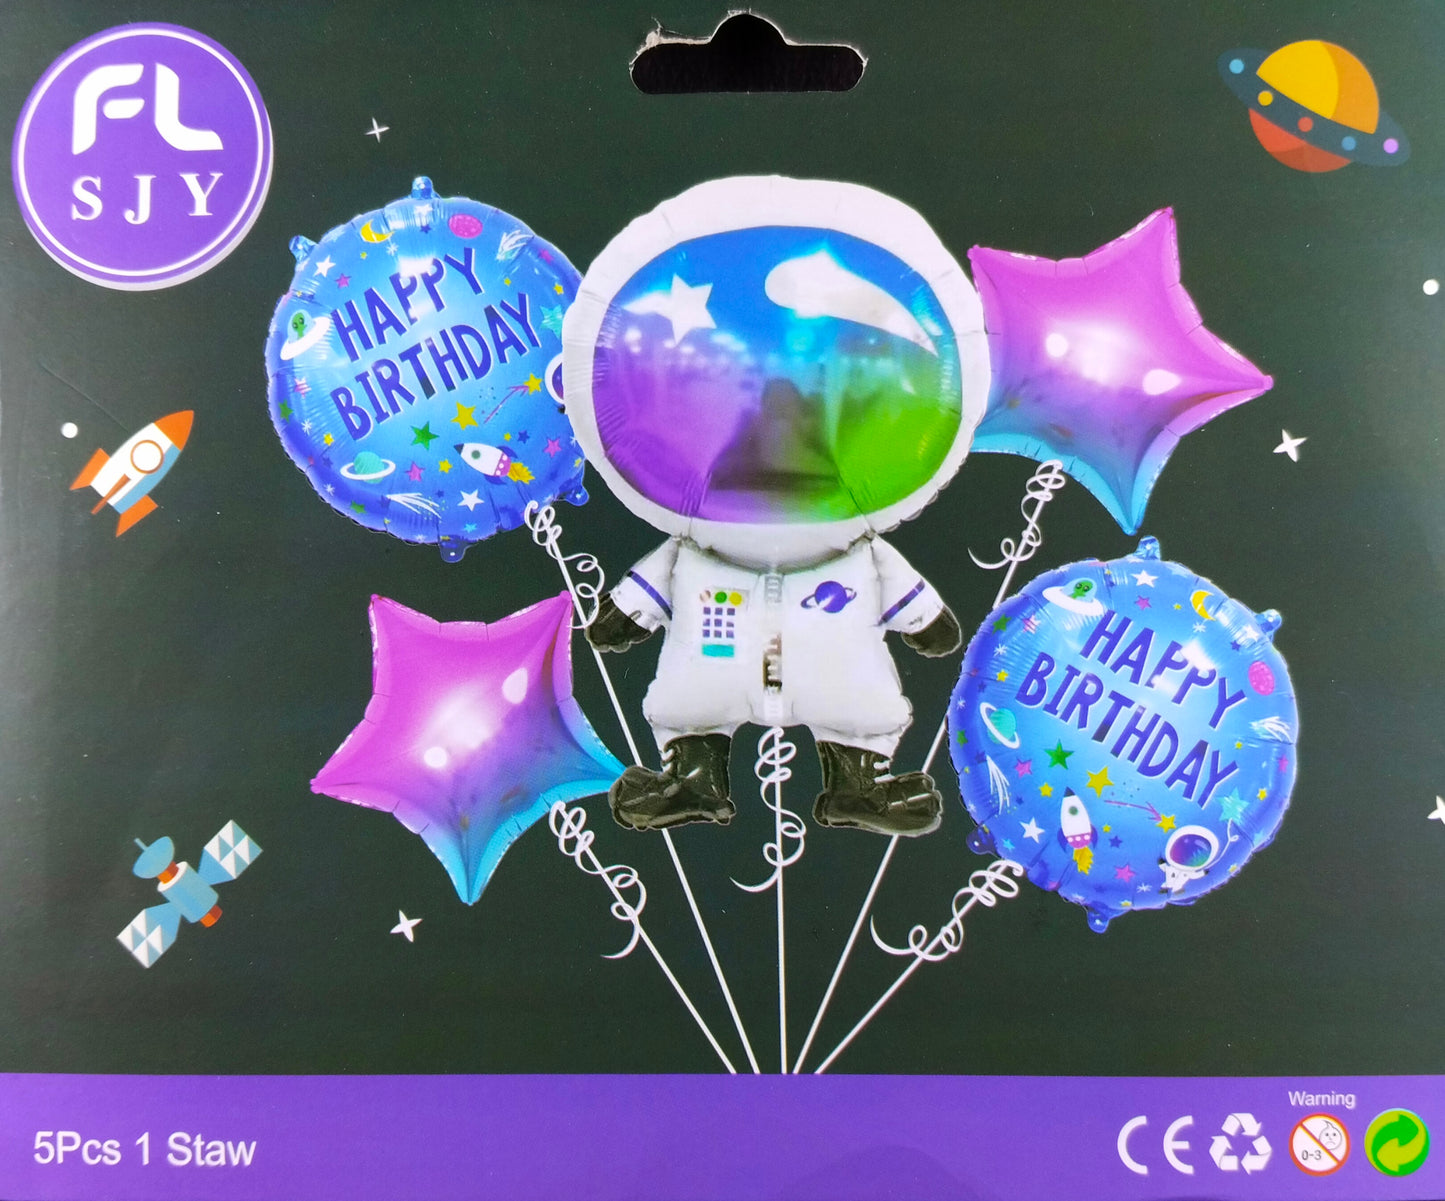 Space Foil Balloon - 5 pieces set for Simple Birthday Decorations at Home